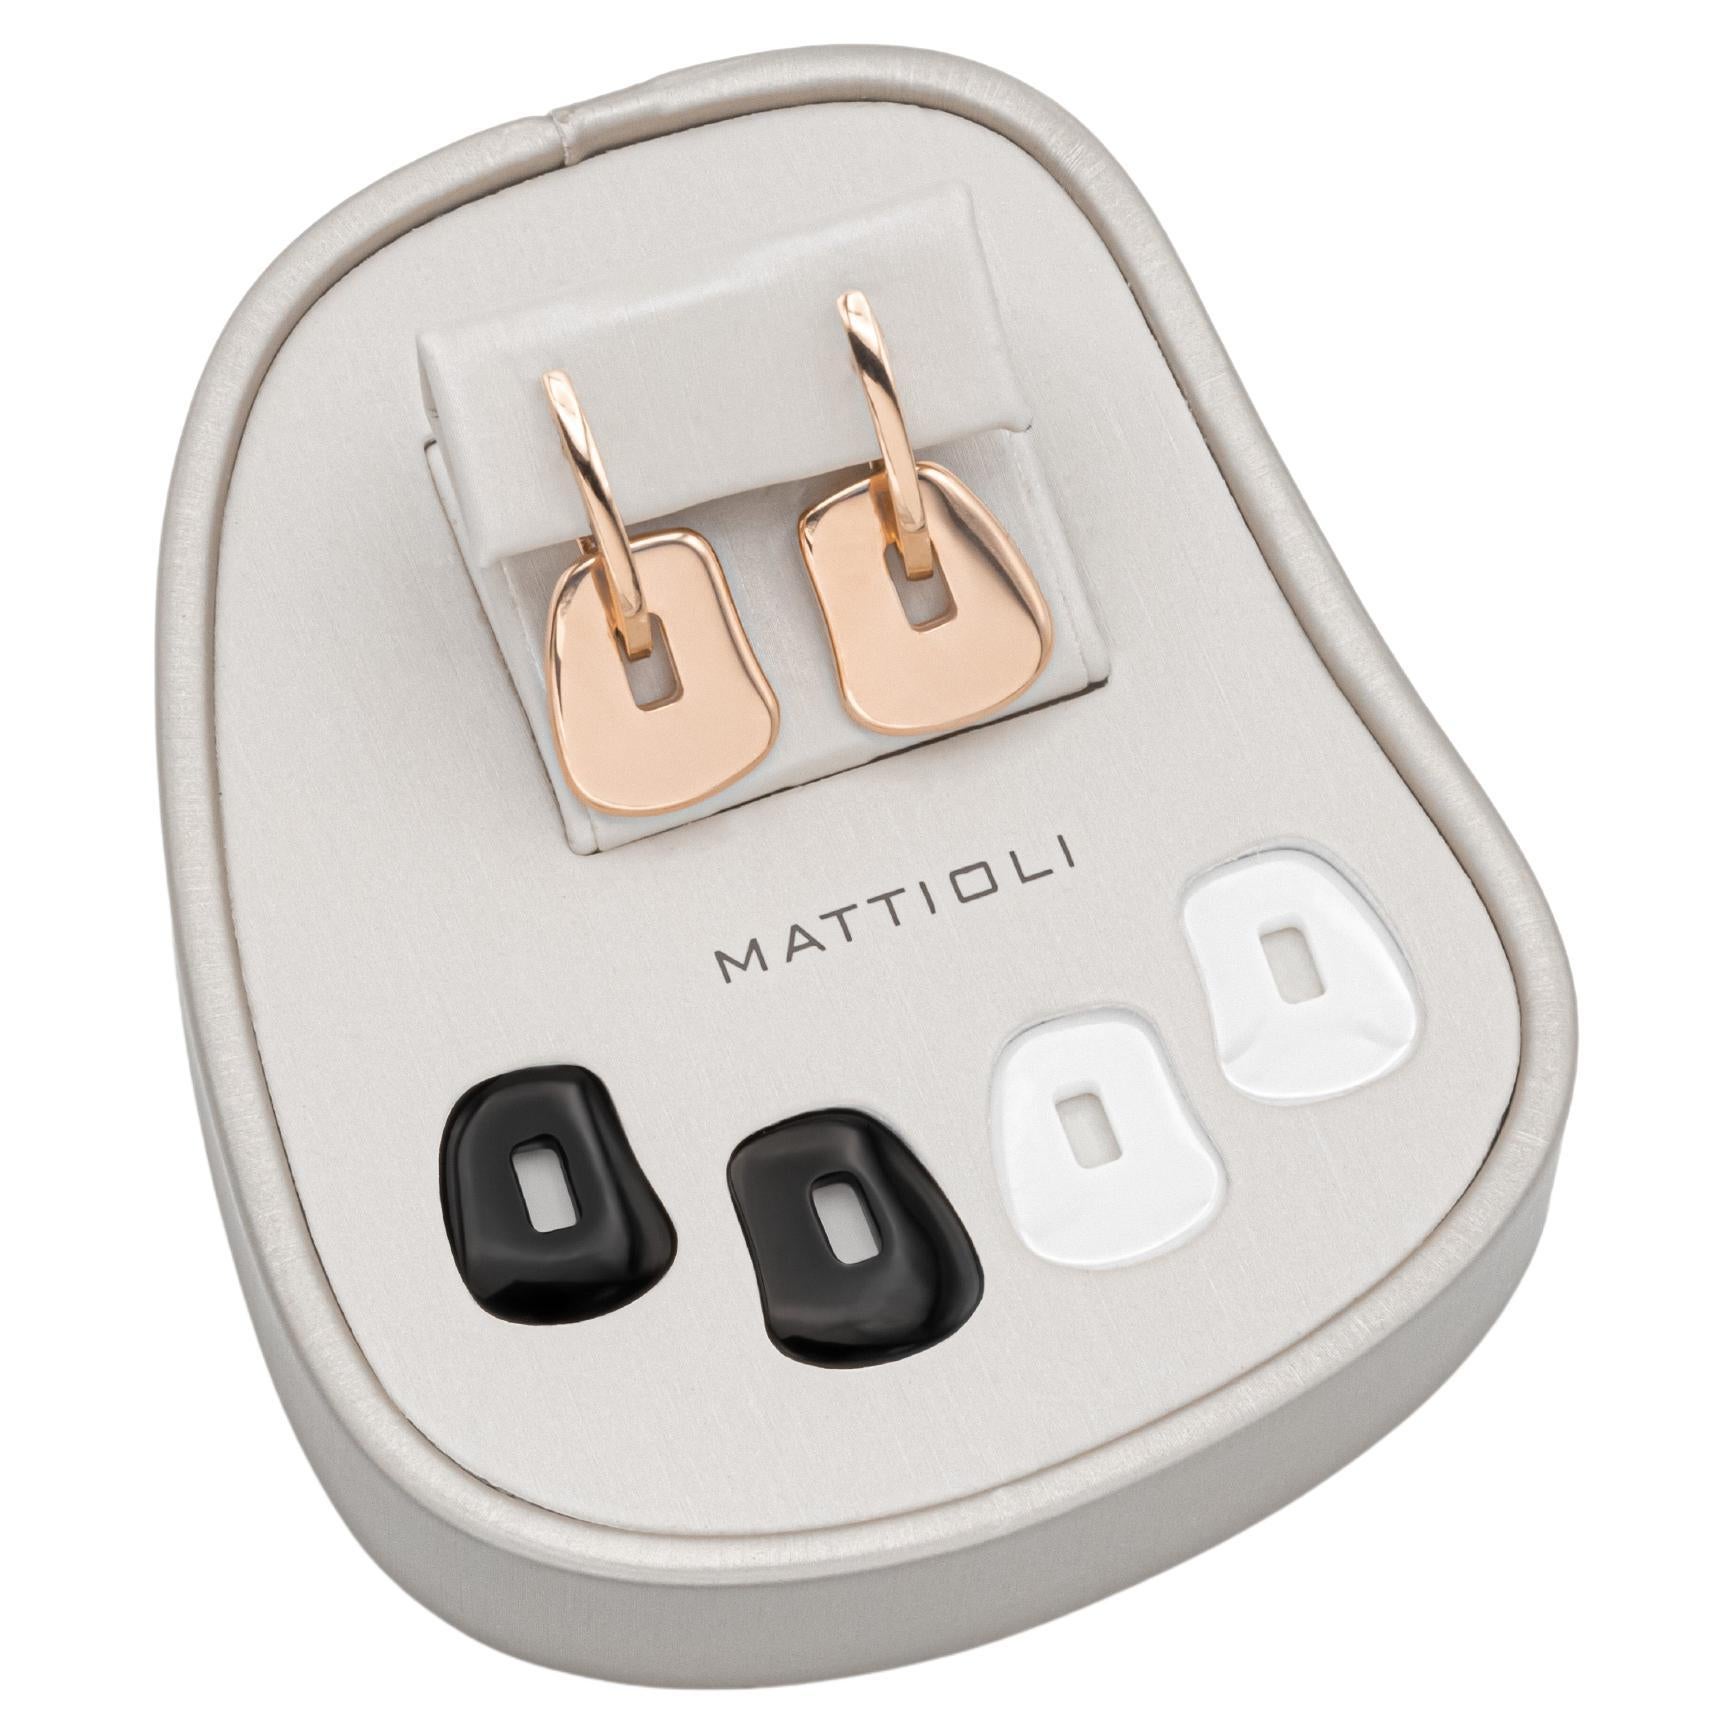 NEW Mattioli Puzzle Ceramic Small 18 Karat white Gold Earrings & 3 colour puzzles
gold (rose or yellow effect) and black and white ceramic 
Also available in Rose & Yellow Gold
The impressive effect of the ceramic makes these earrings a total gold